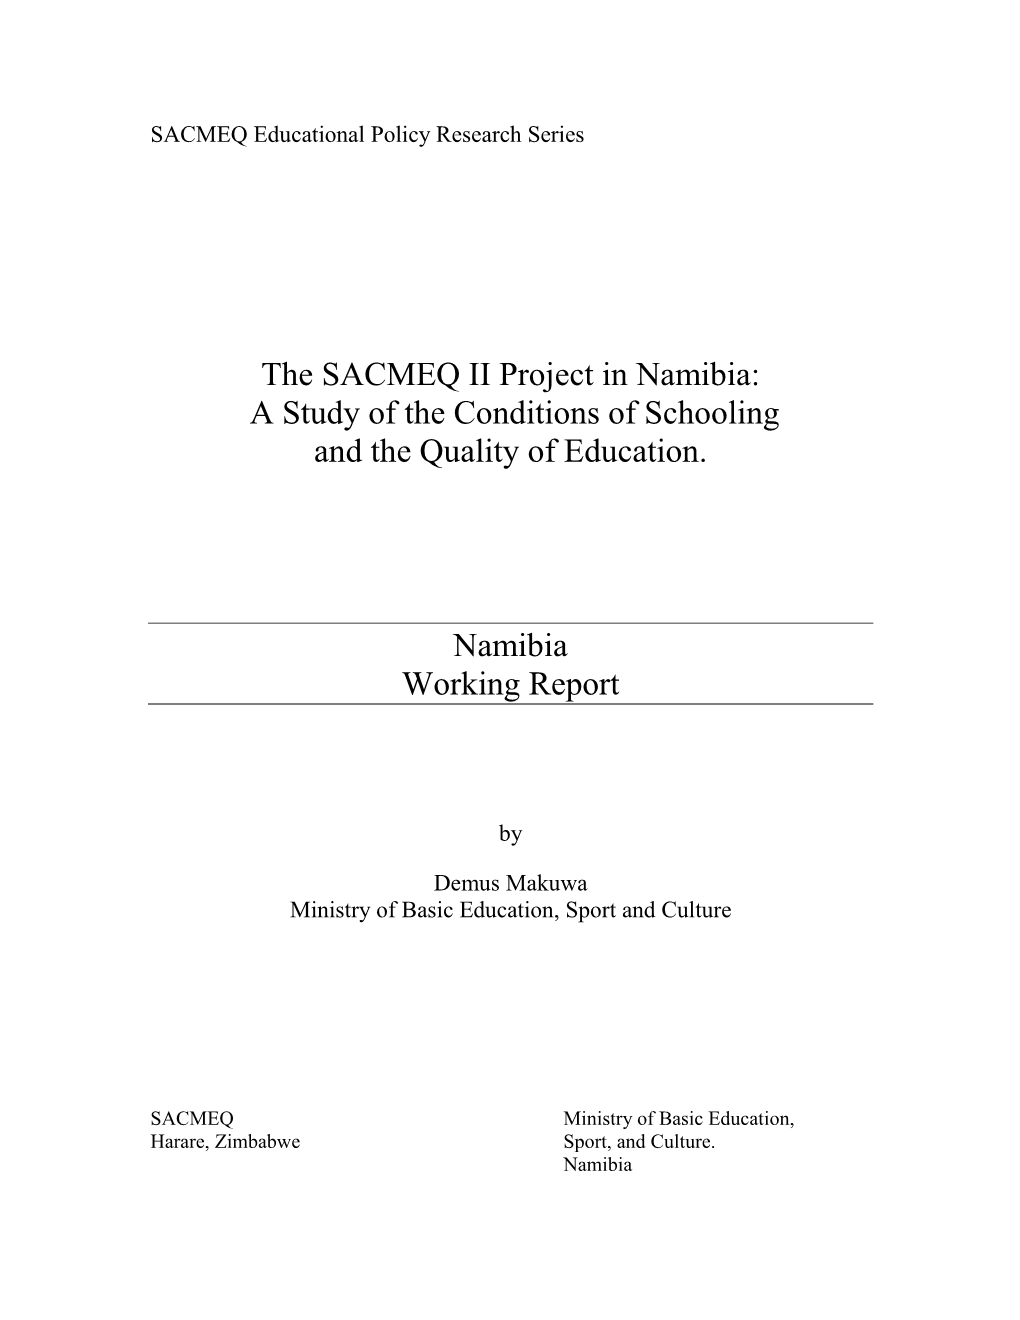 The SACMEQ II Project in Namibia: a Study of the Conditions of Schooling and the Quality of Education